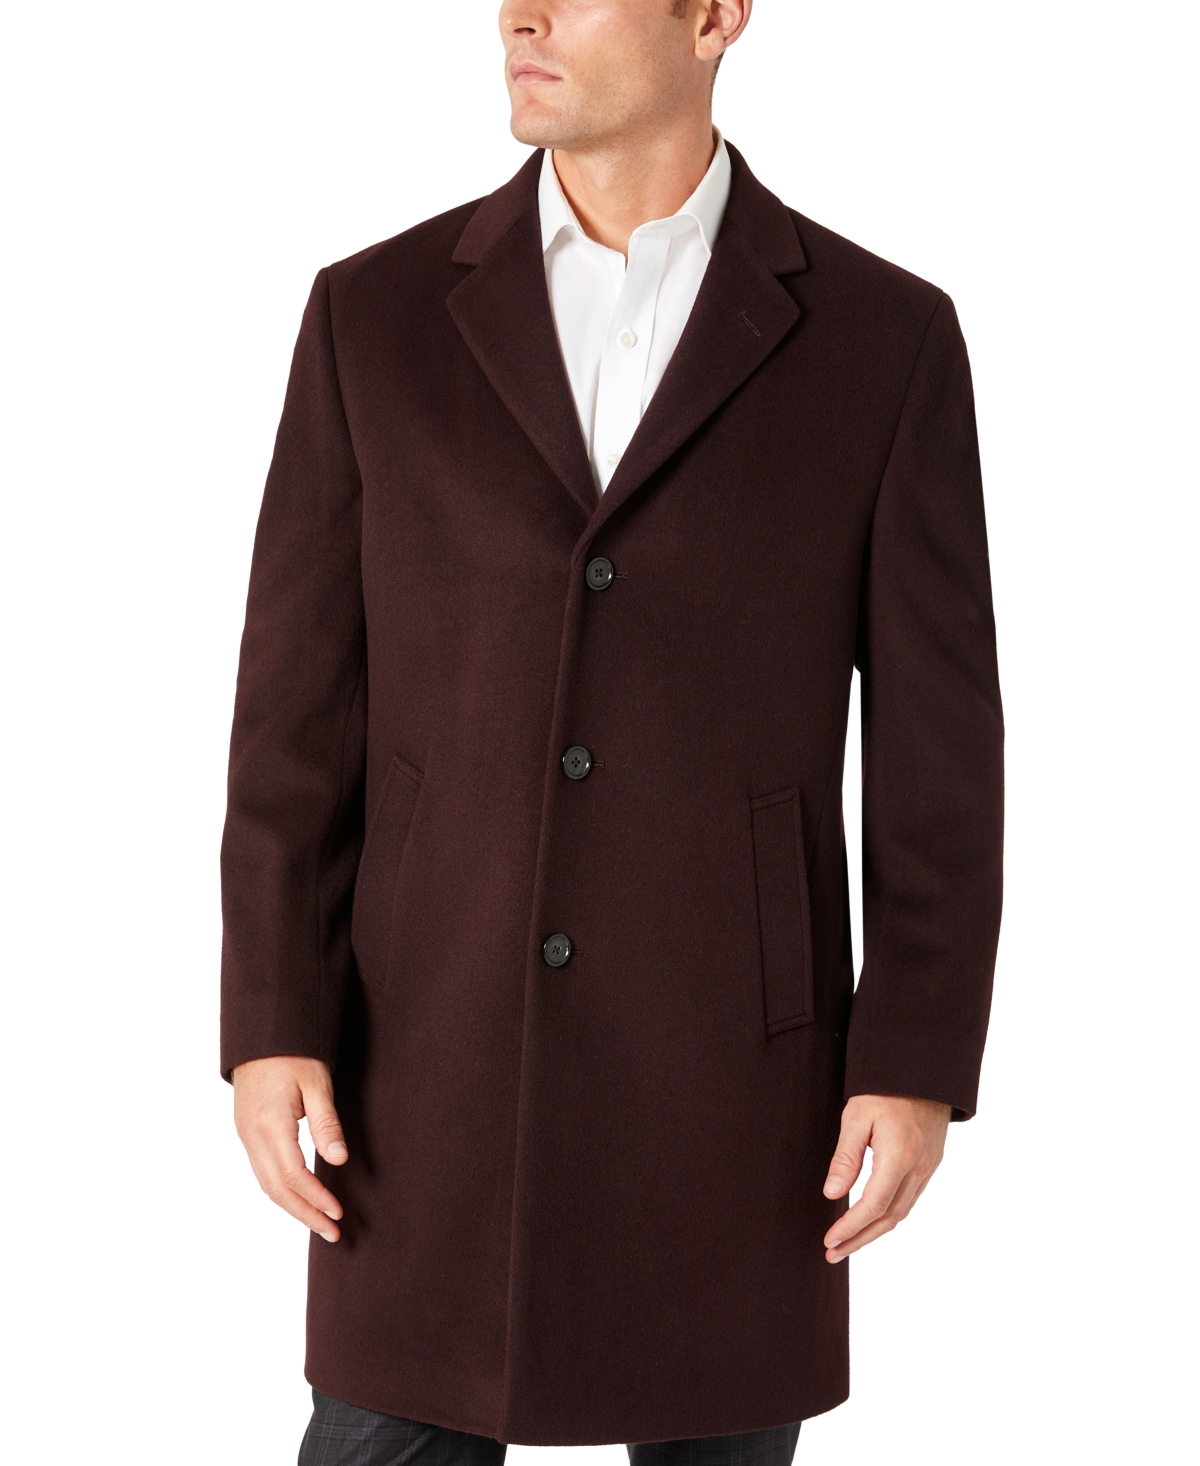 Men's Single-Breasted Classic Fit Overcoat - Burgundy